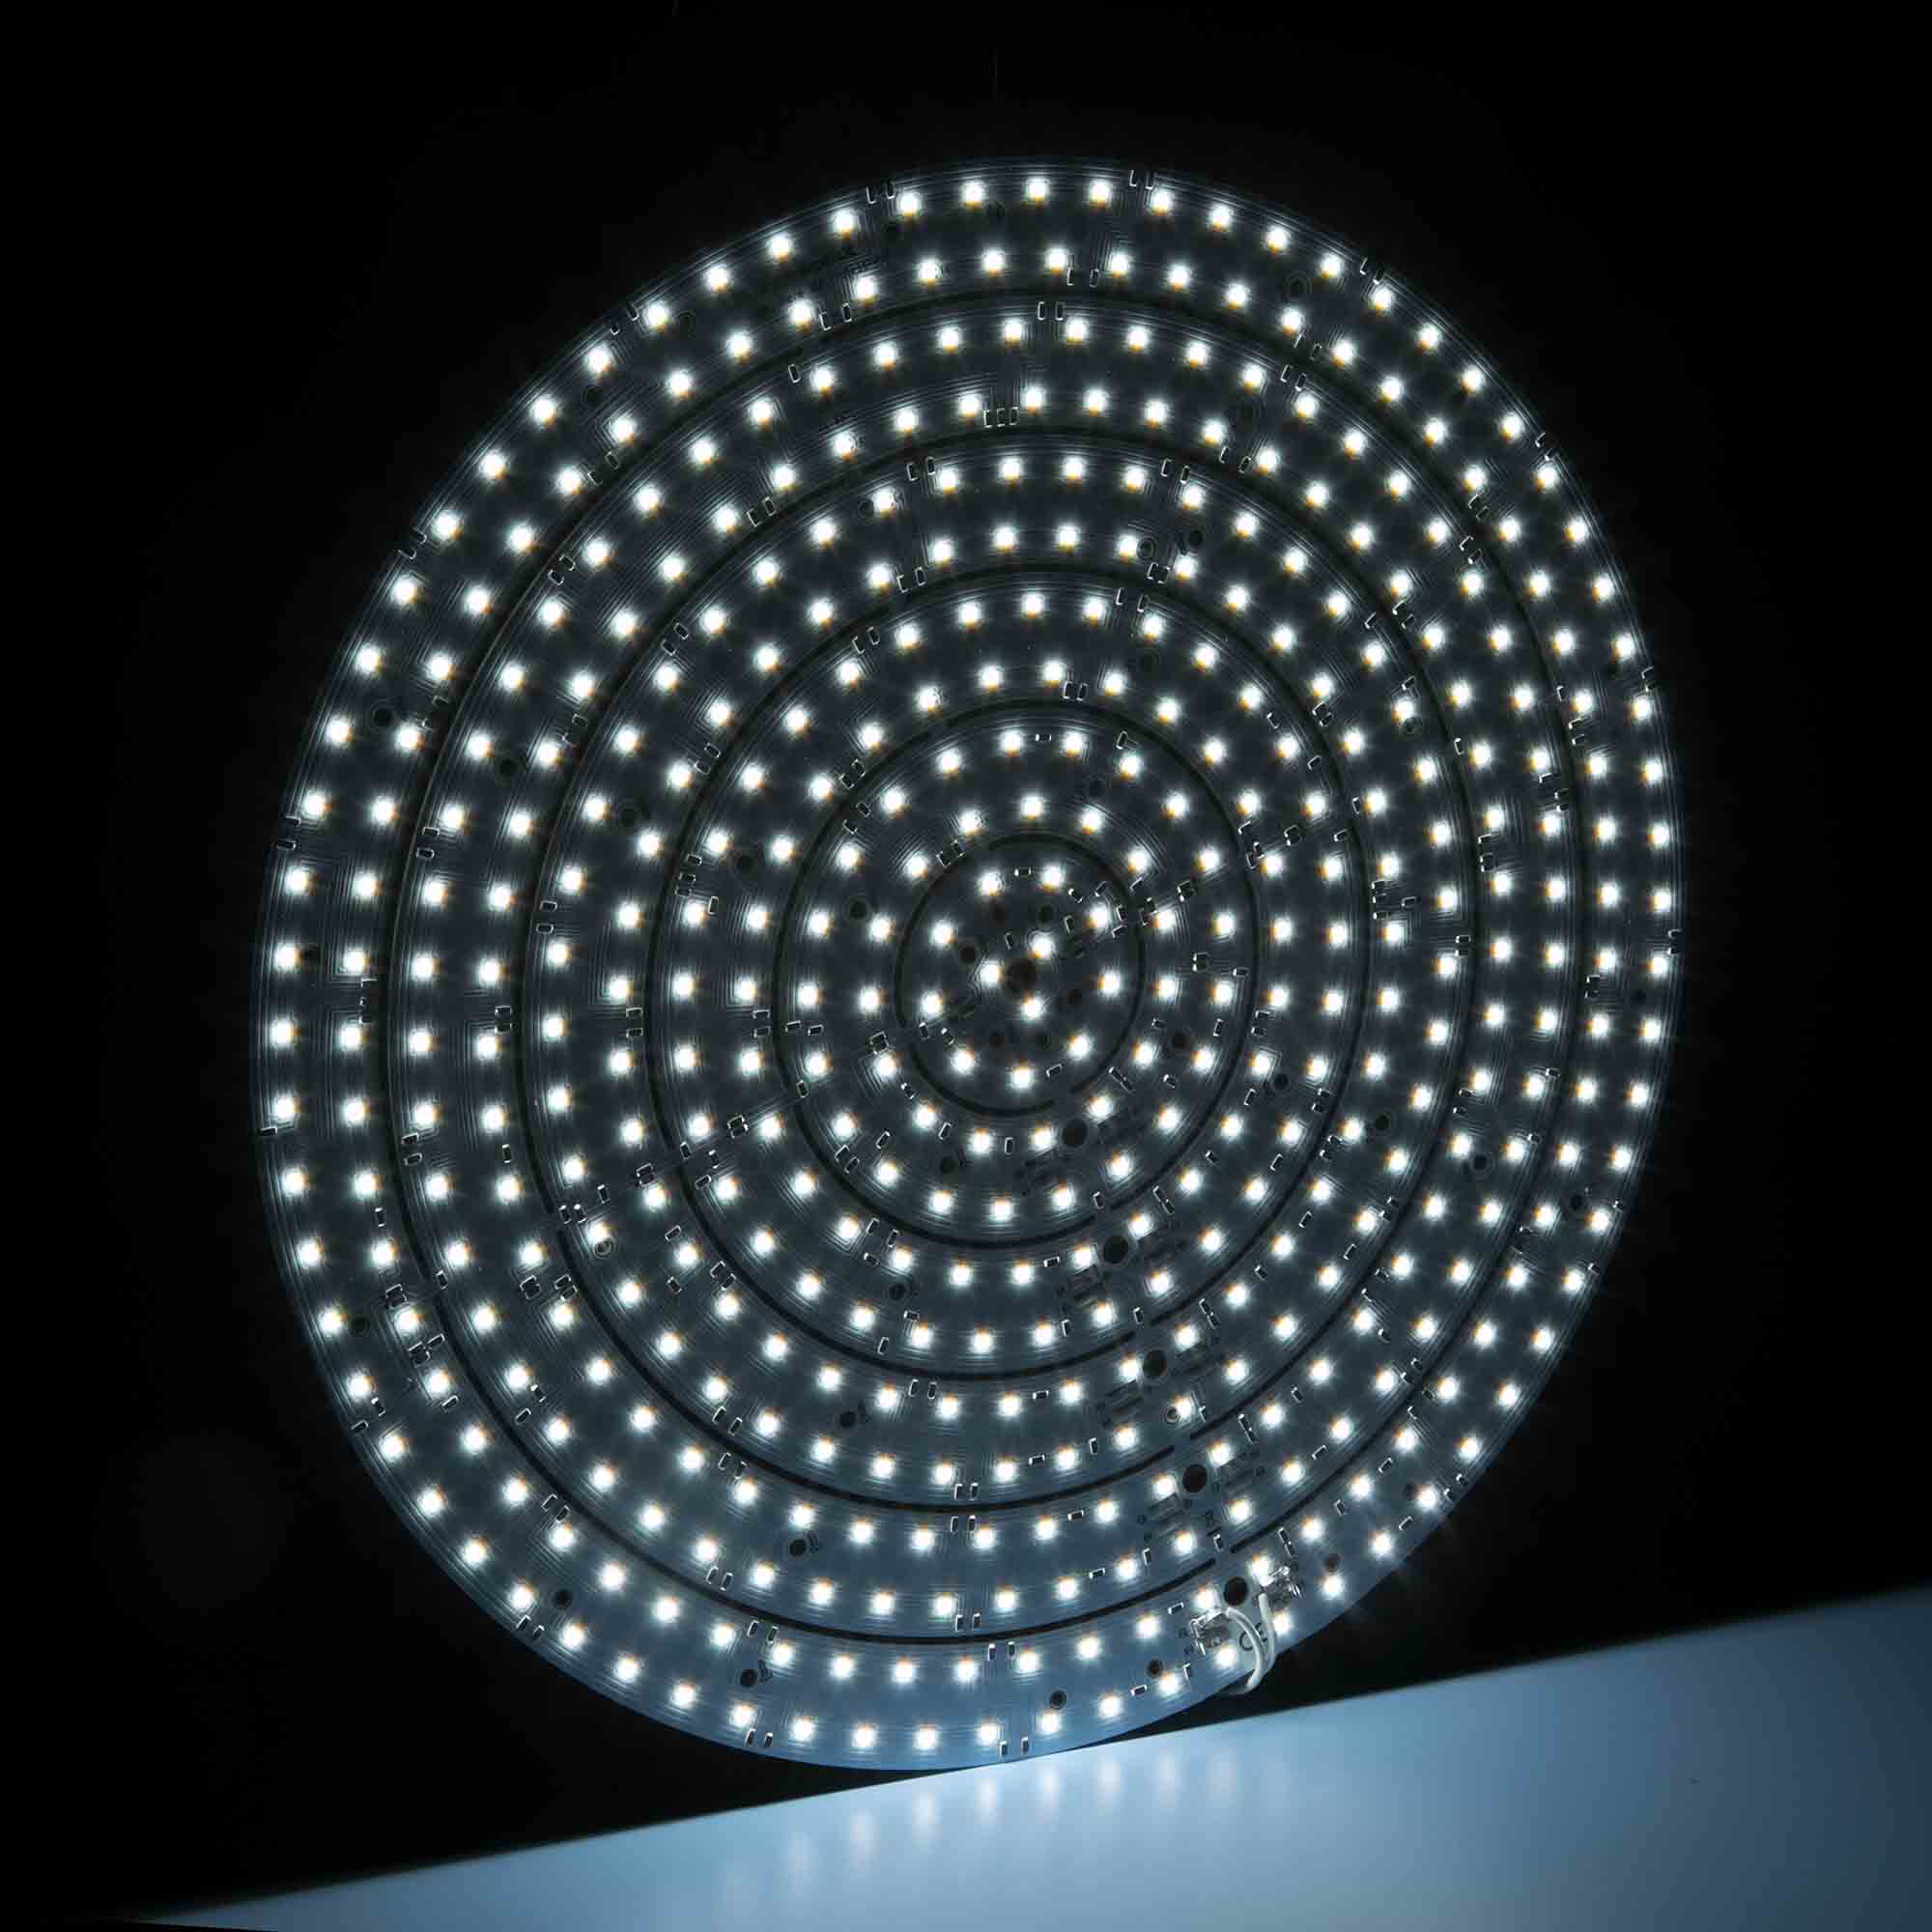 LumiSphere 360 TW Professional Round LED Module with 5 breakable rings 864 LEDs 2700K-5700K 4870lm 36W